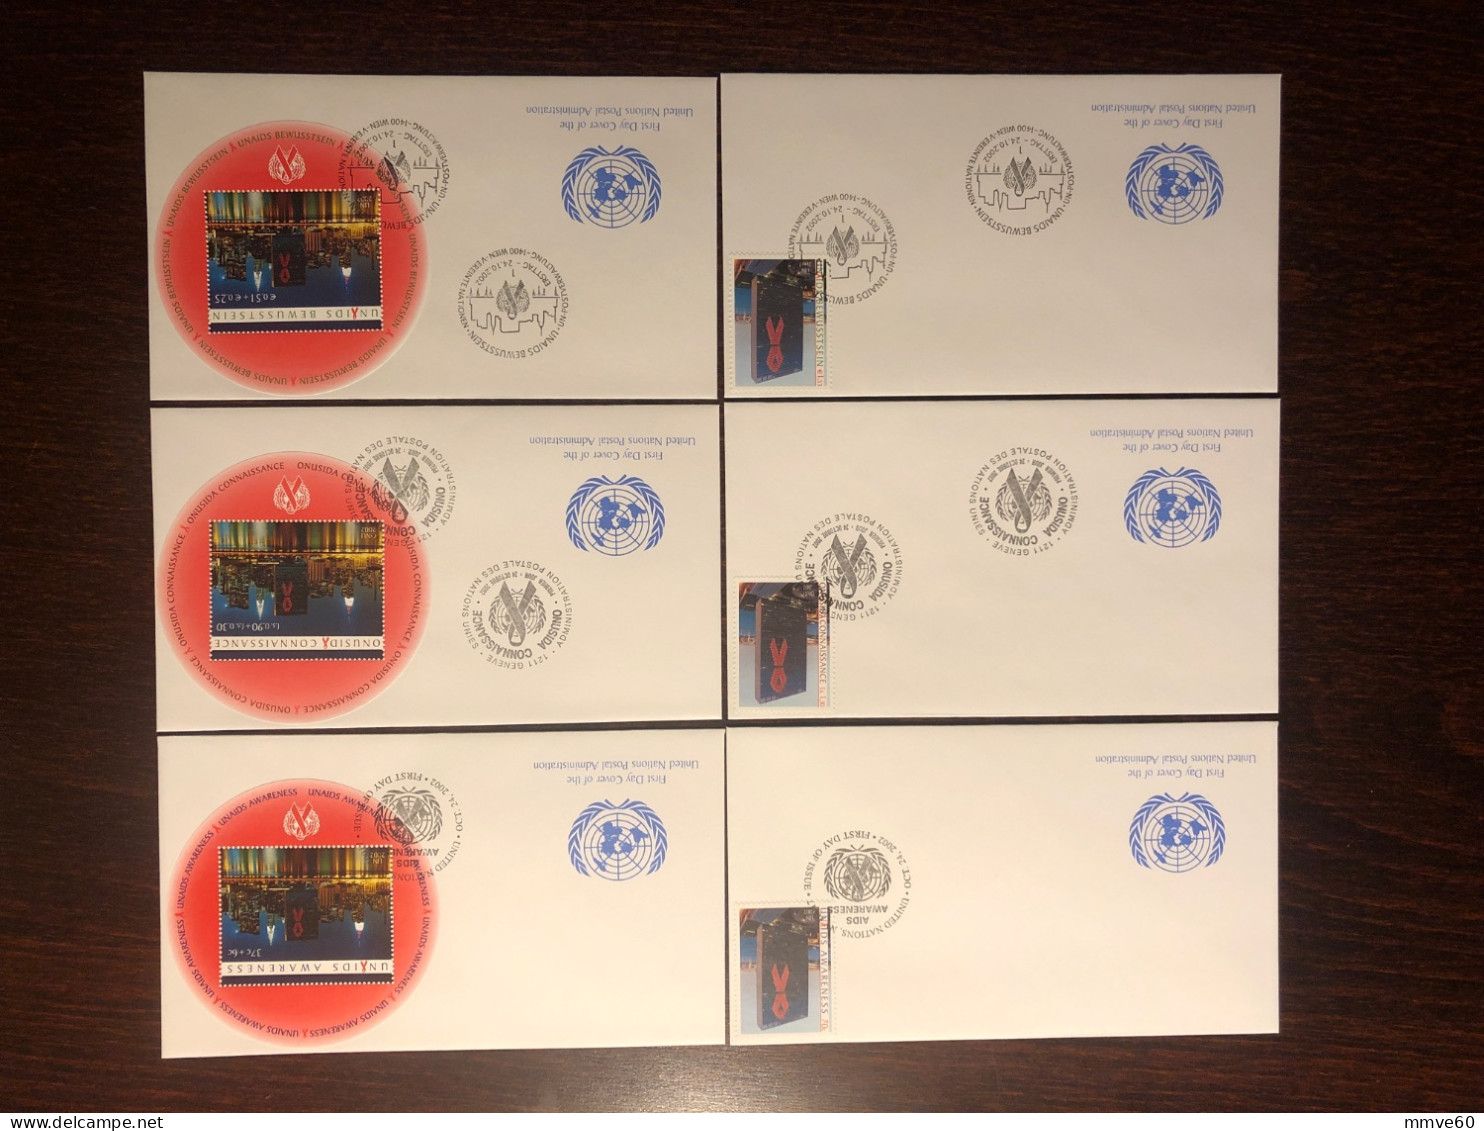 UNITED NATIONS UN UNO NY GENEVA VIENNA FDC COVER 2002 YEAR AIDS SIDA HEALTH MEDICINE - Emissions Communes New York/Genève/Vienne